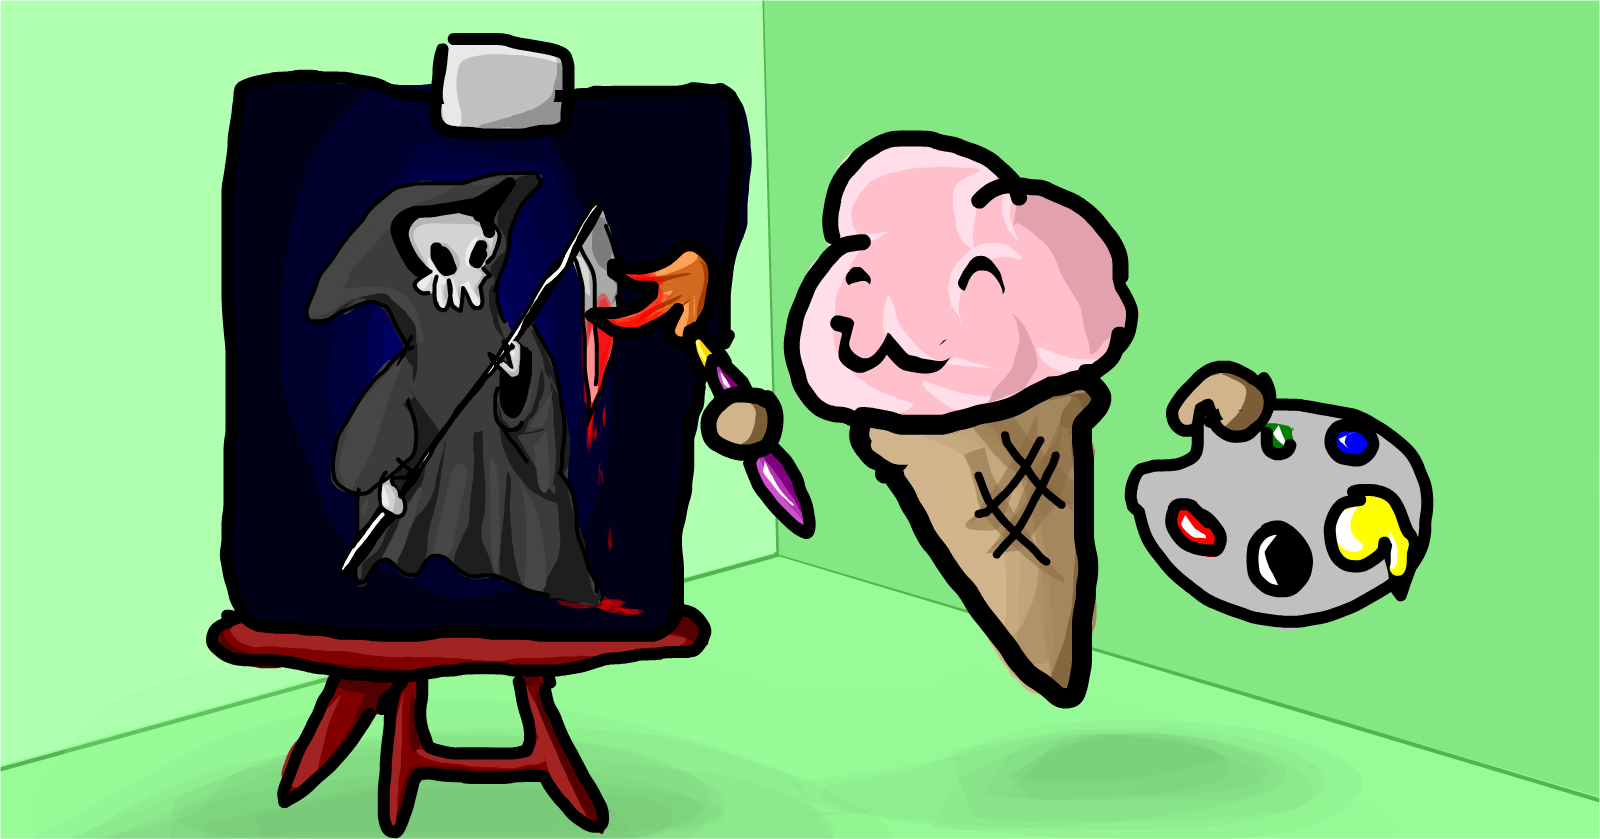 "Death" by Ice Cream colored